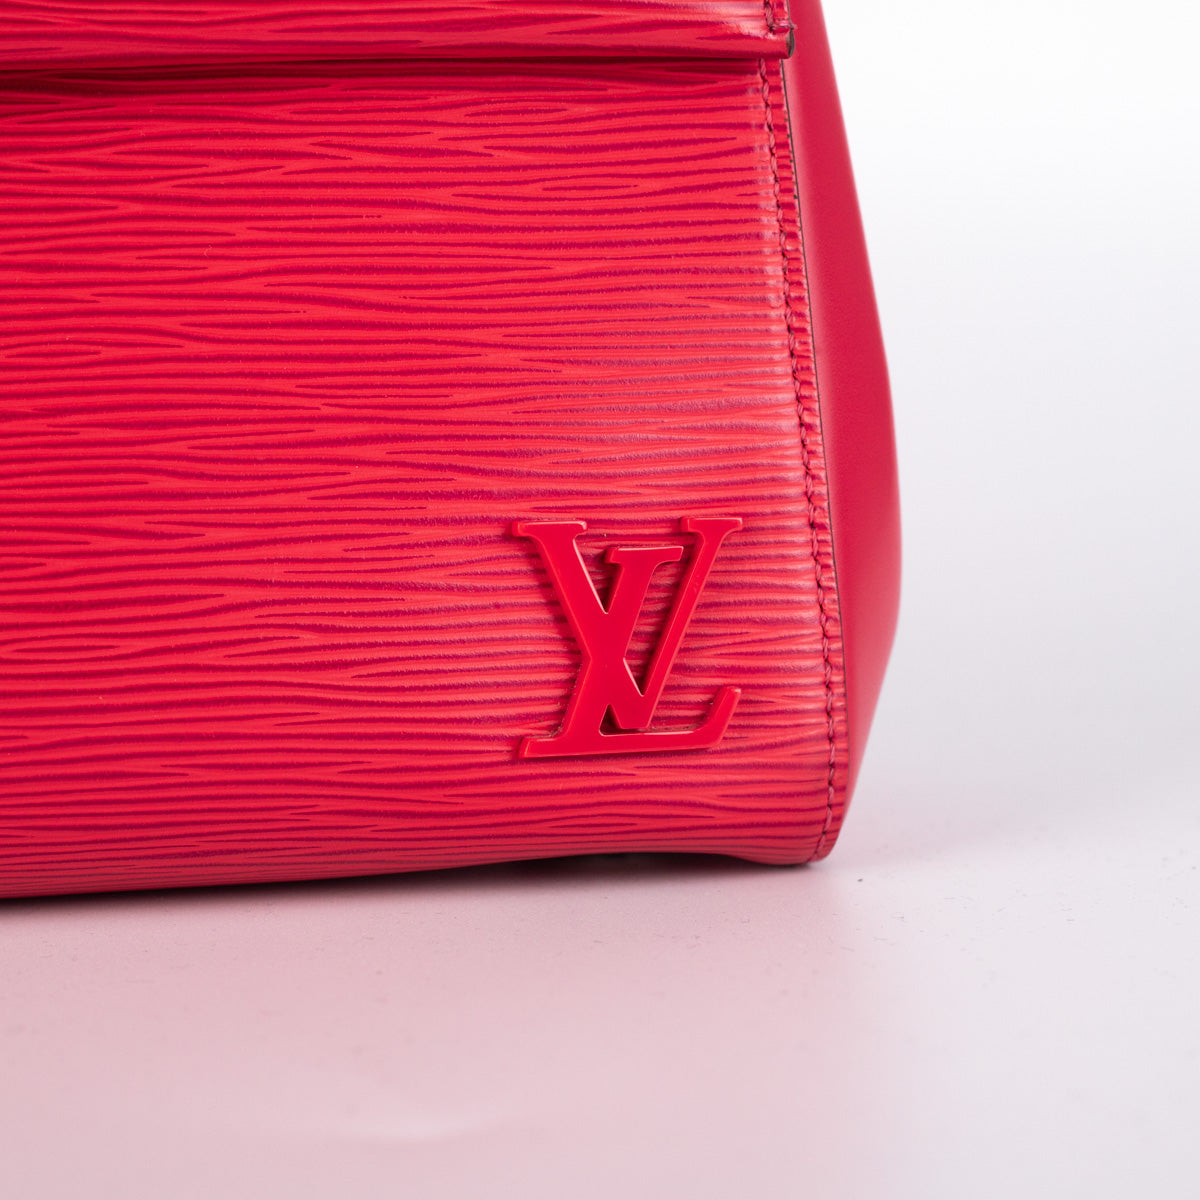 Louis Vuitton Cluny BB: First Impressions - Chase Amie